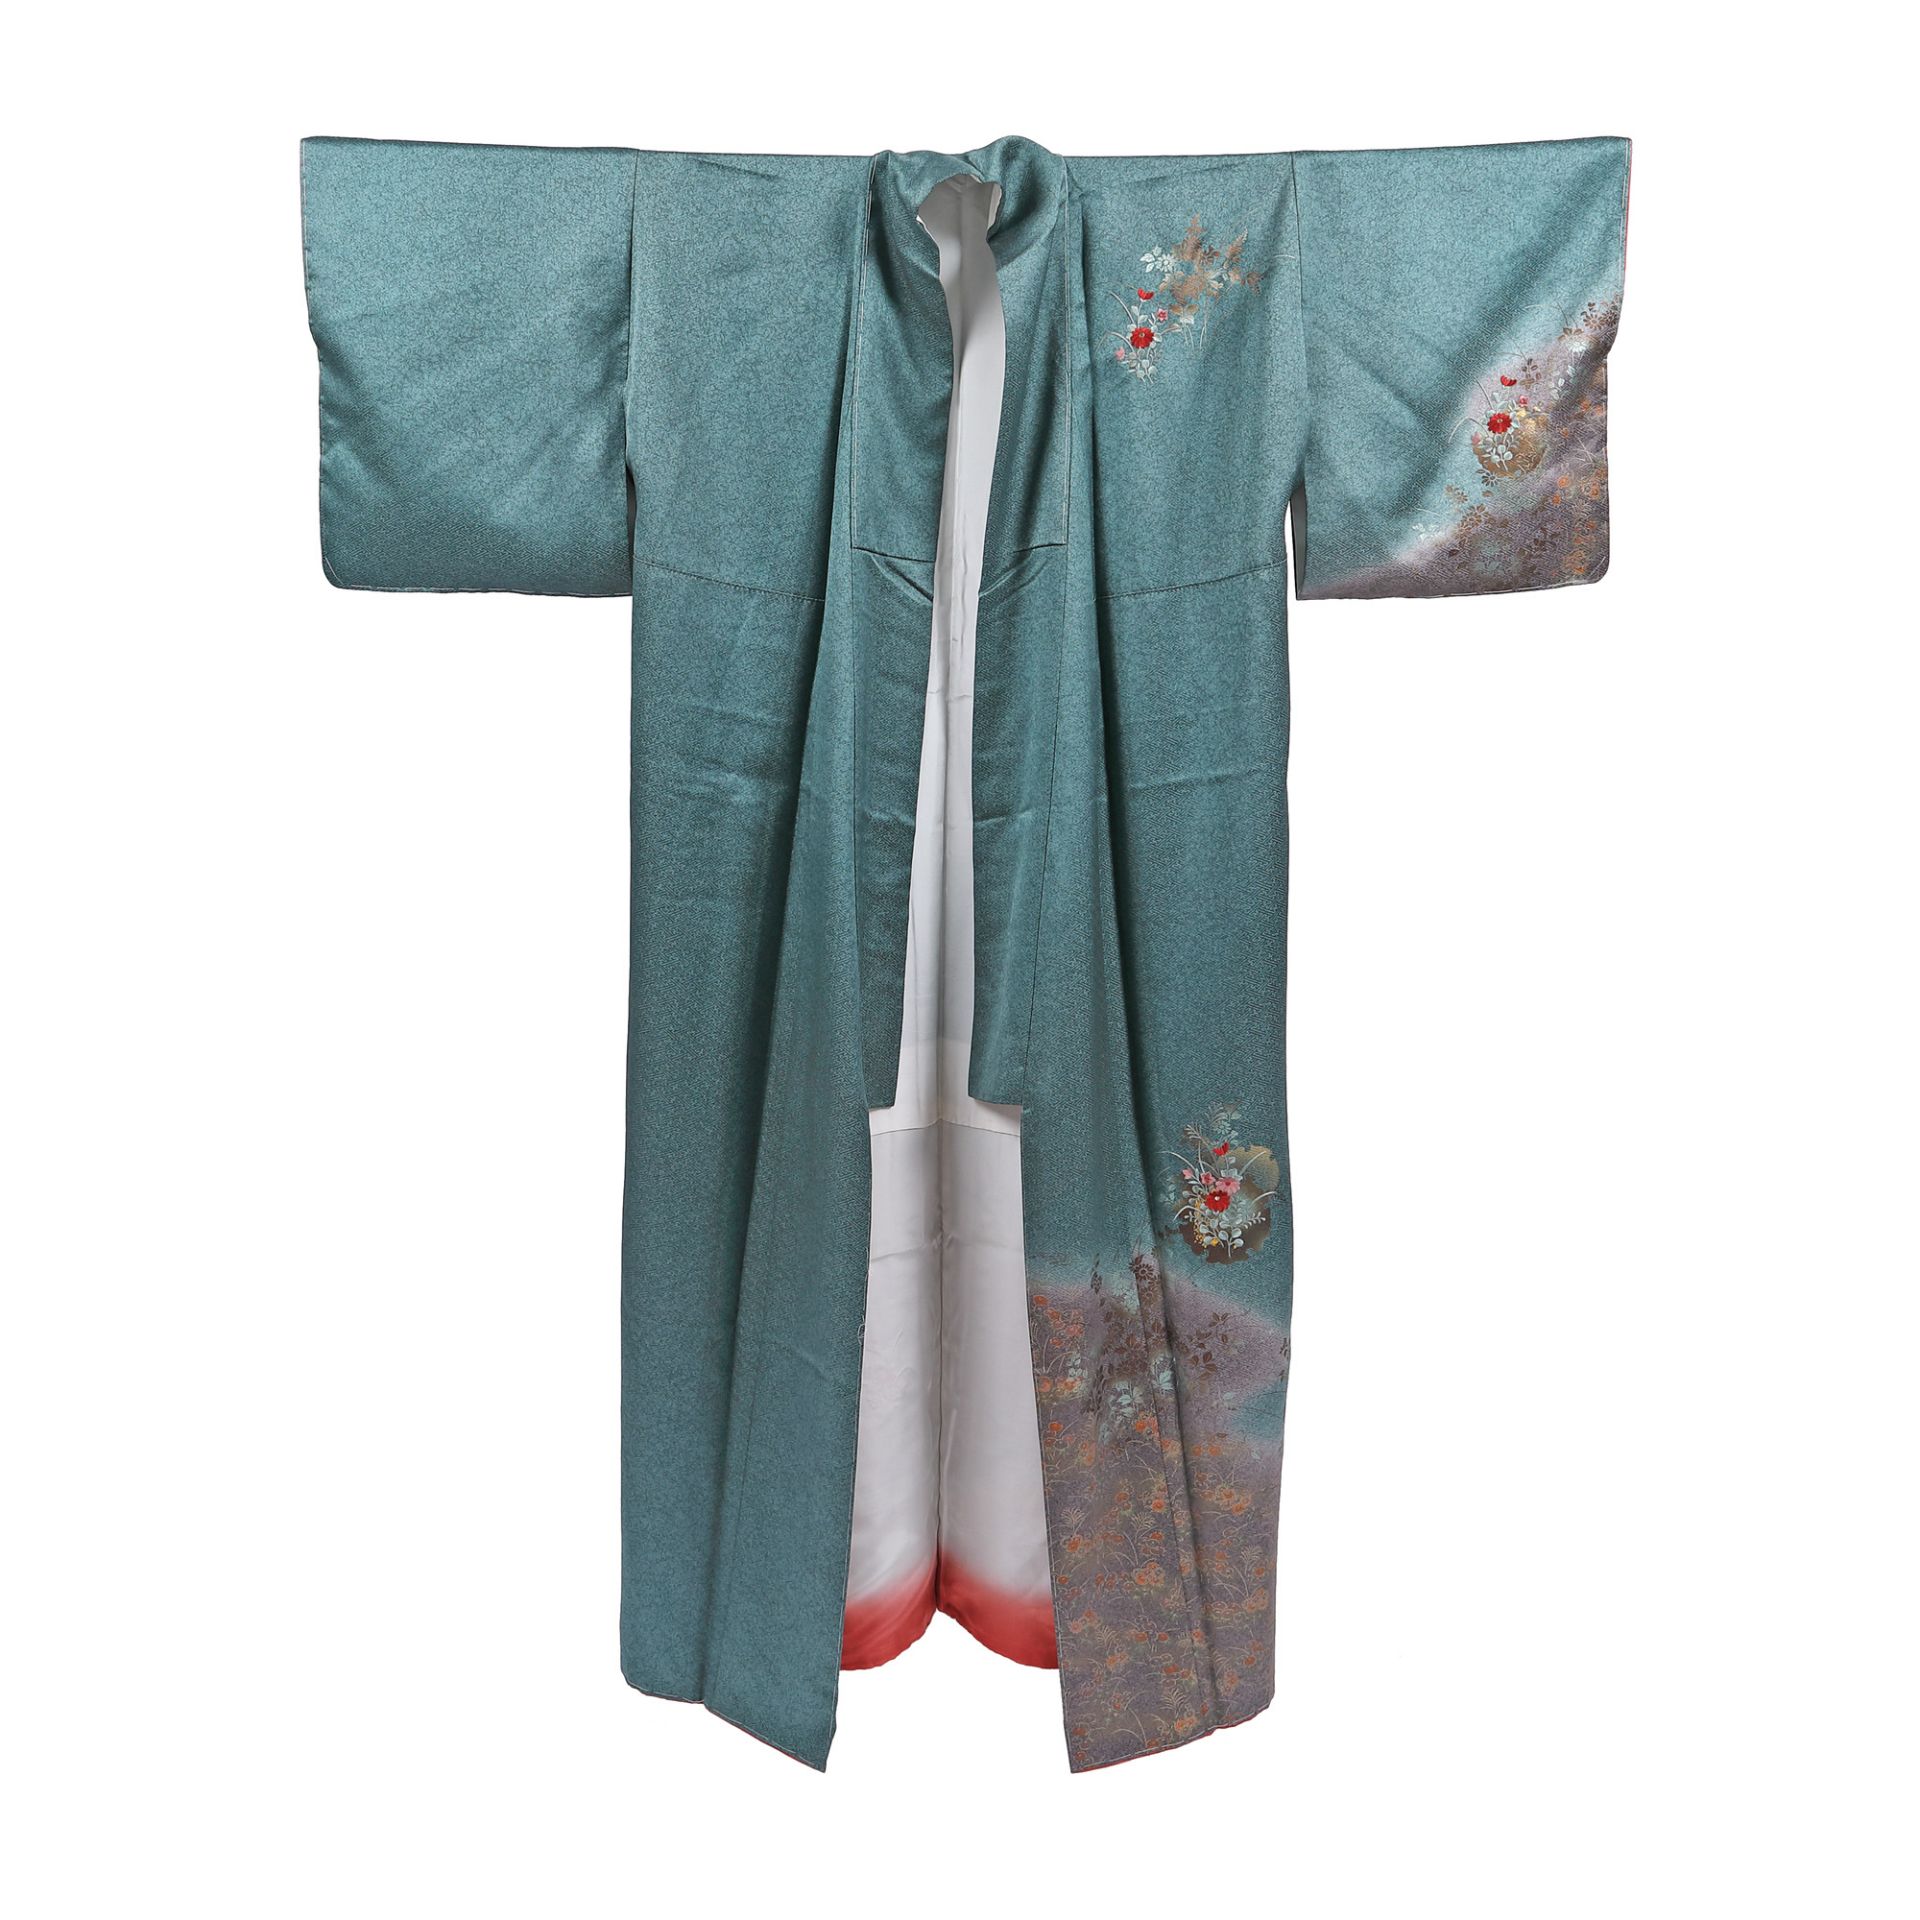 Tsukesage (formal kimono) made of silk, it has elaborate floral embellishments, embroidered and pain